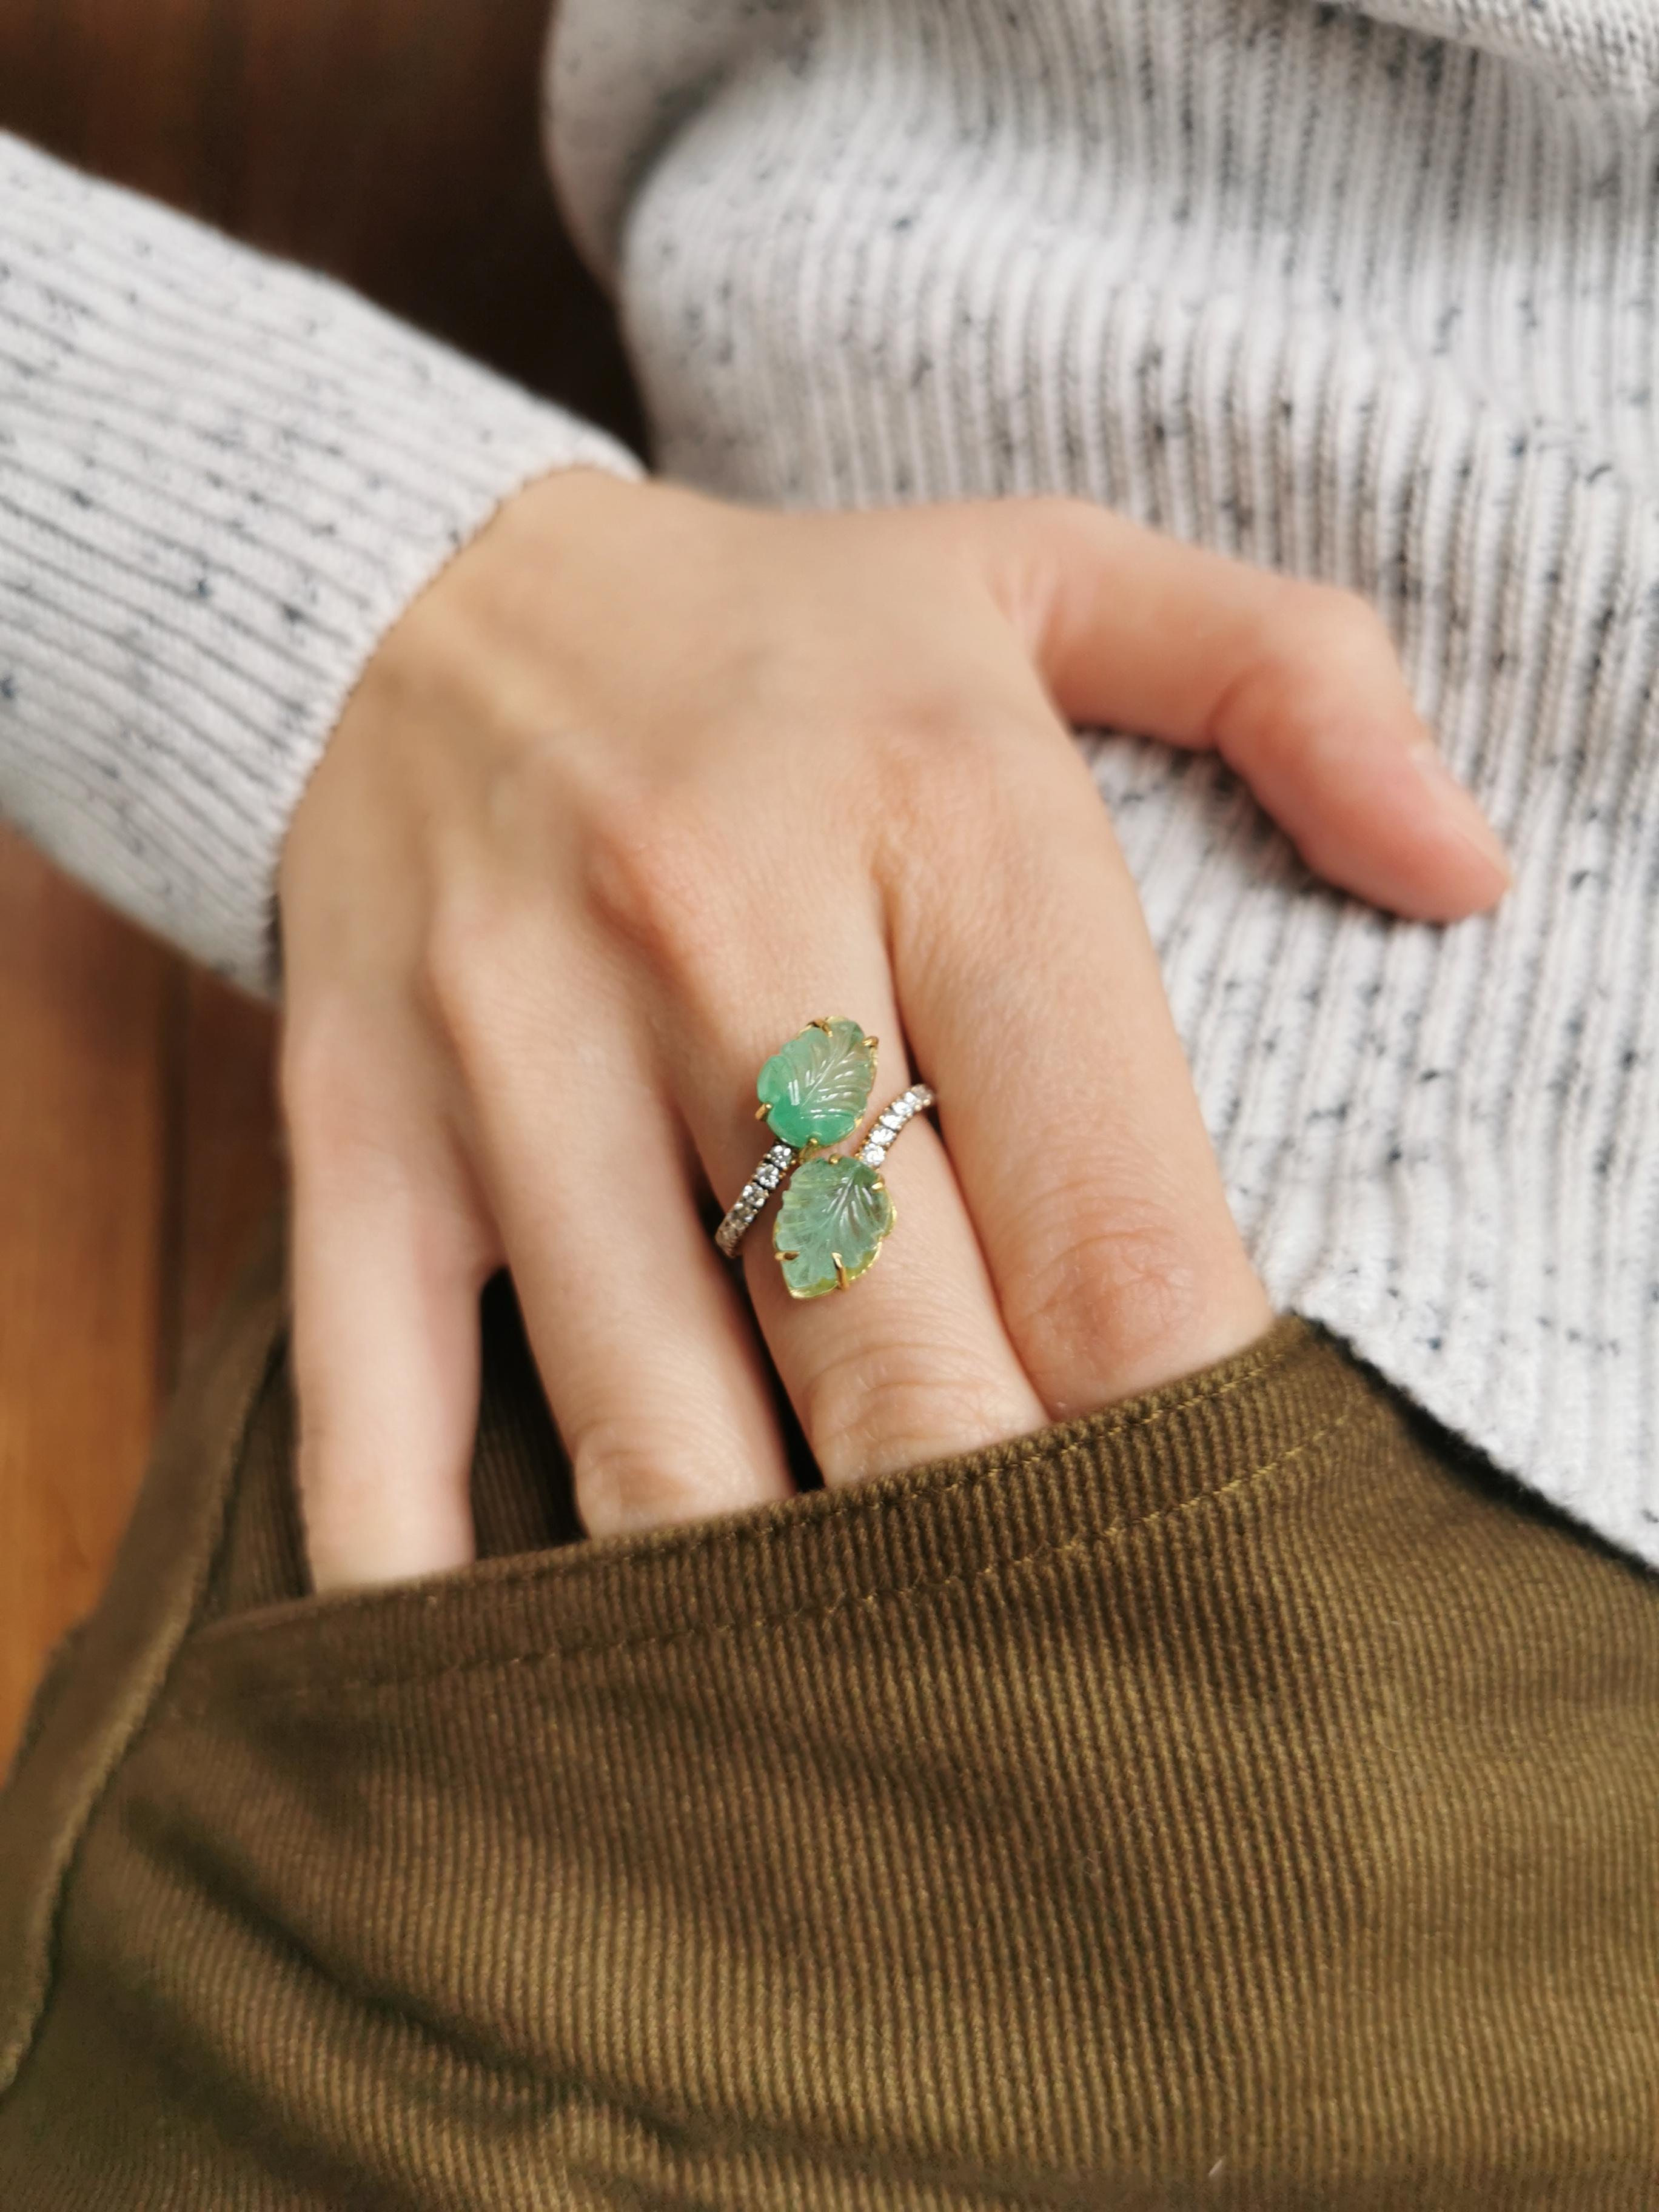 Made of 18K yellow and white gold, this charming and delicate You and Me ring is setted with two engraved emeralds, stylised leaves with sixteen  white diamonds on the mount.
Engraved emerald weight: 4.00carats
Round diamonds: 0.20carats
Size